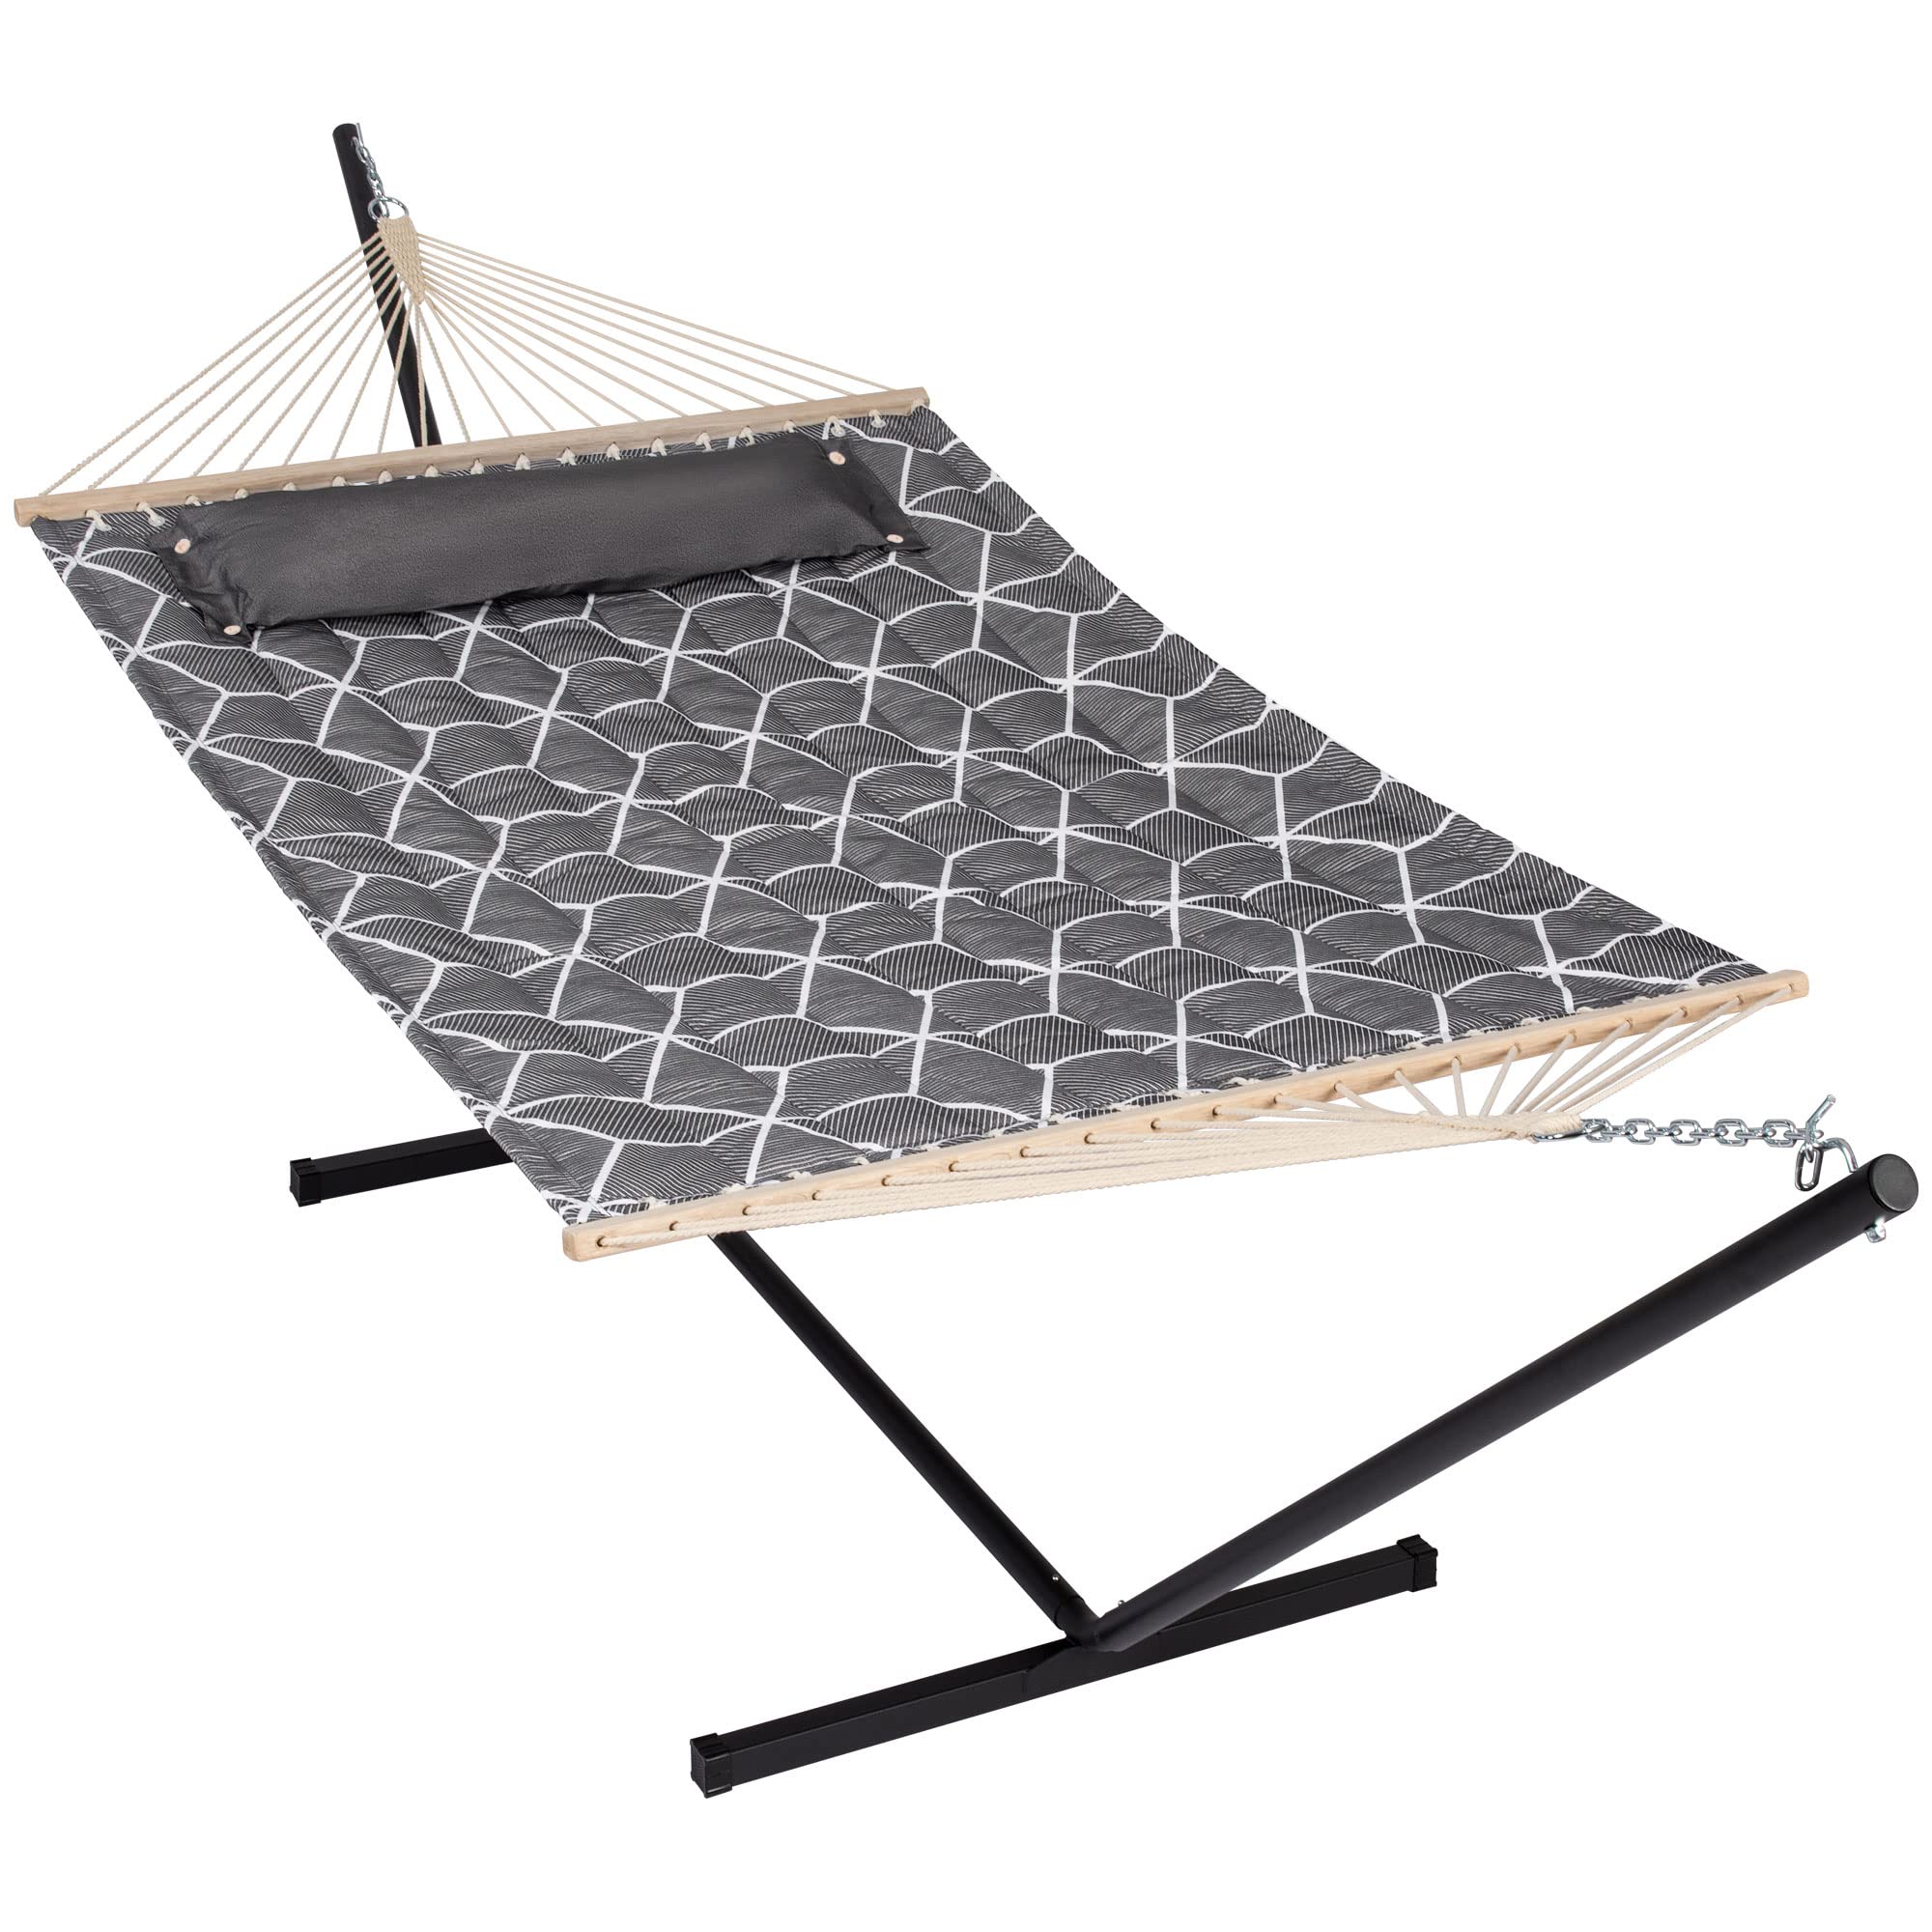 ANOW Double Hammock with Stand Included 2 Person Hammock with Stand for Outside 450 LBS Weight Capacity Gray Cube並行輸